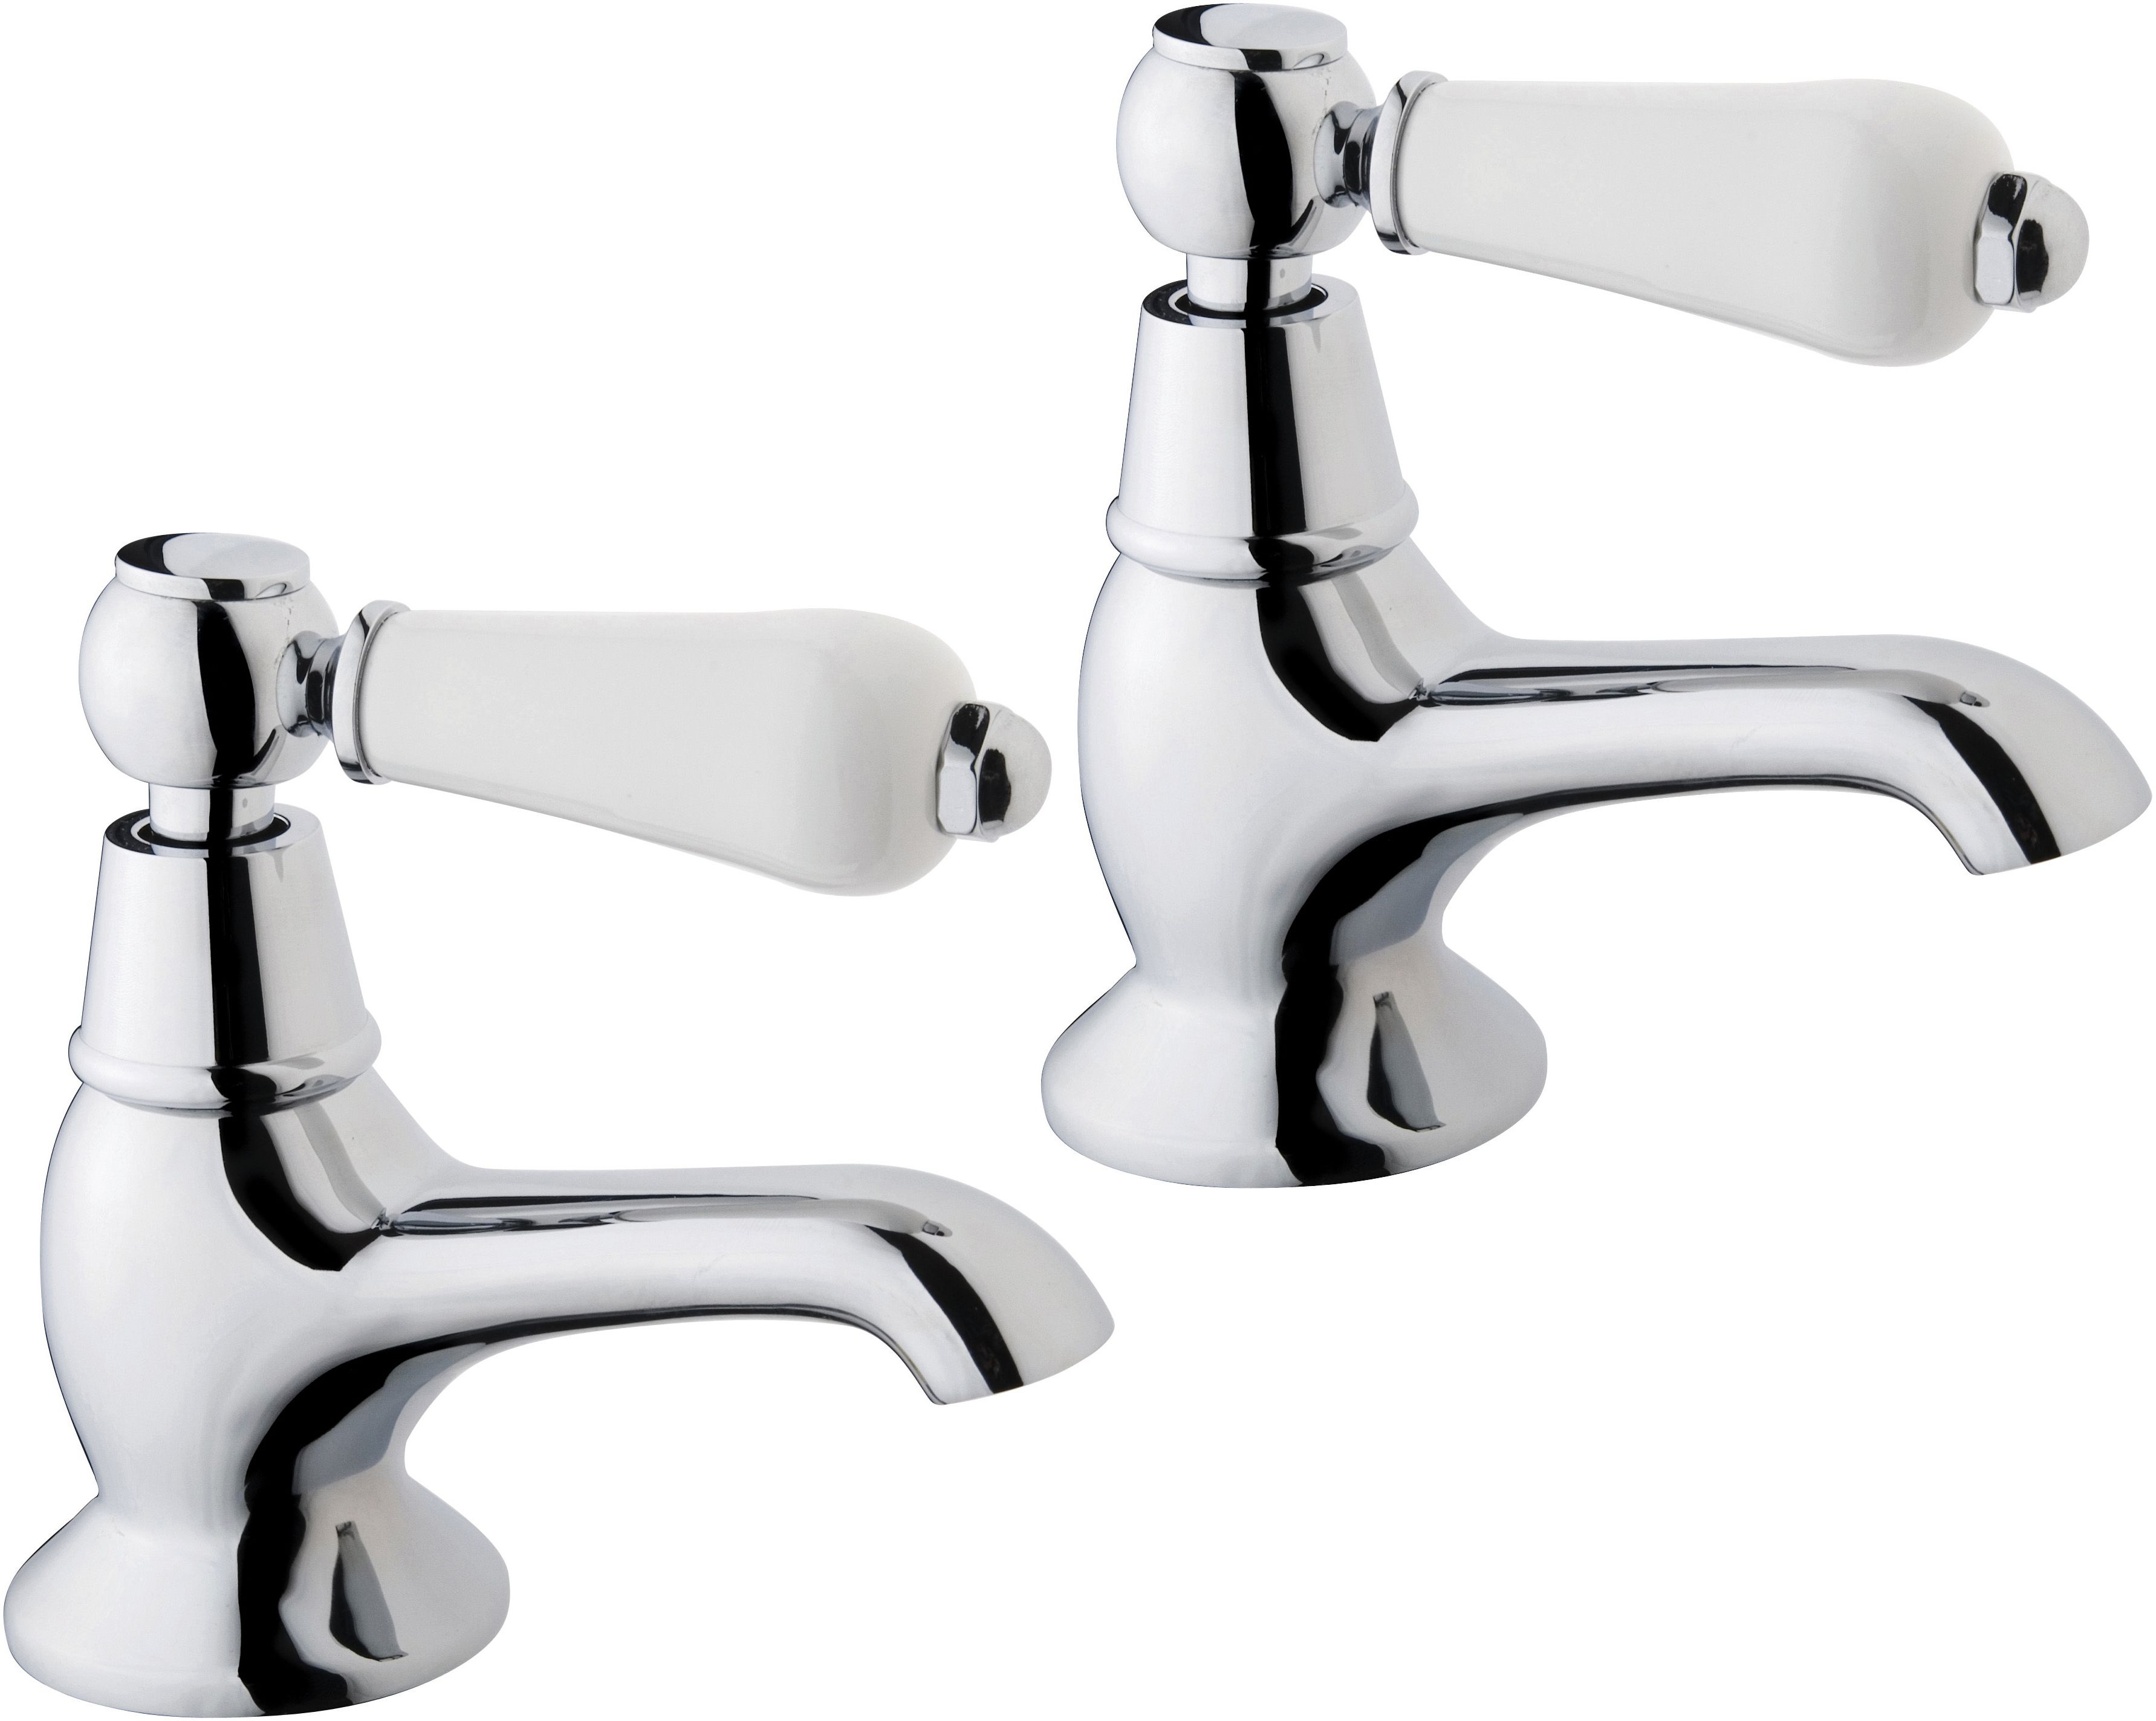 Image of Wickes Enchanted Bath Taps - Chrome